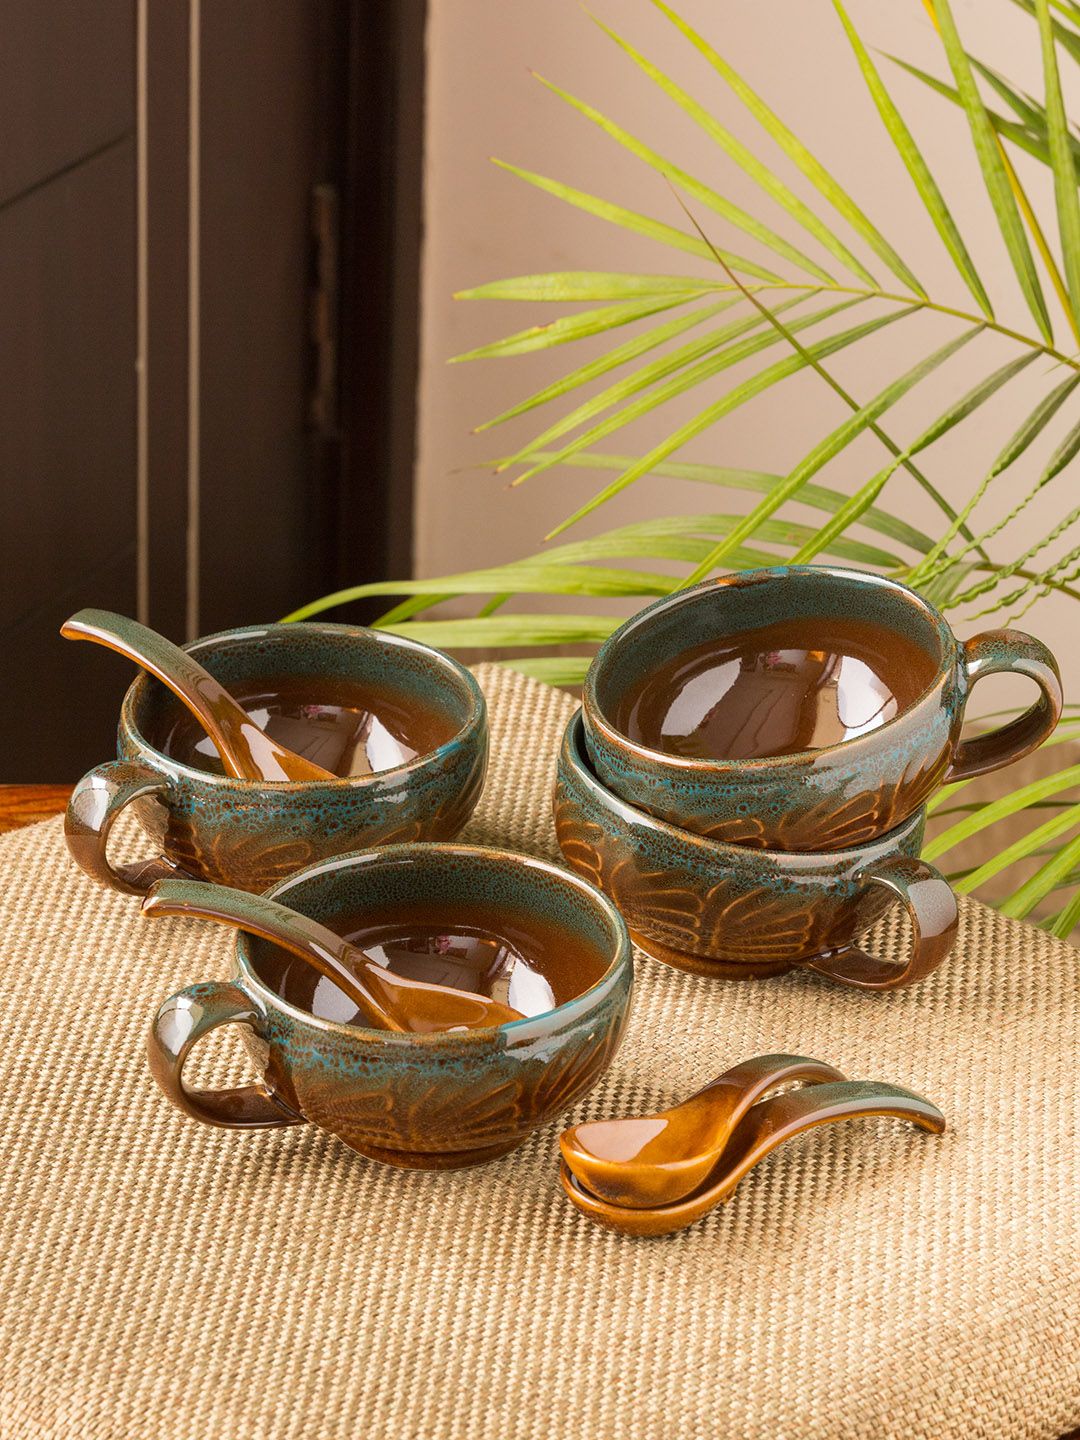 ExclusiveLane Set of 4 Brown & Teal Green Printed Ceramic Soup Bowls With Spoons Price in India